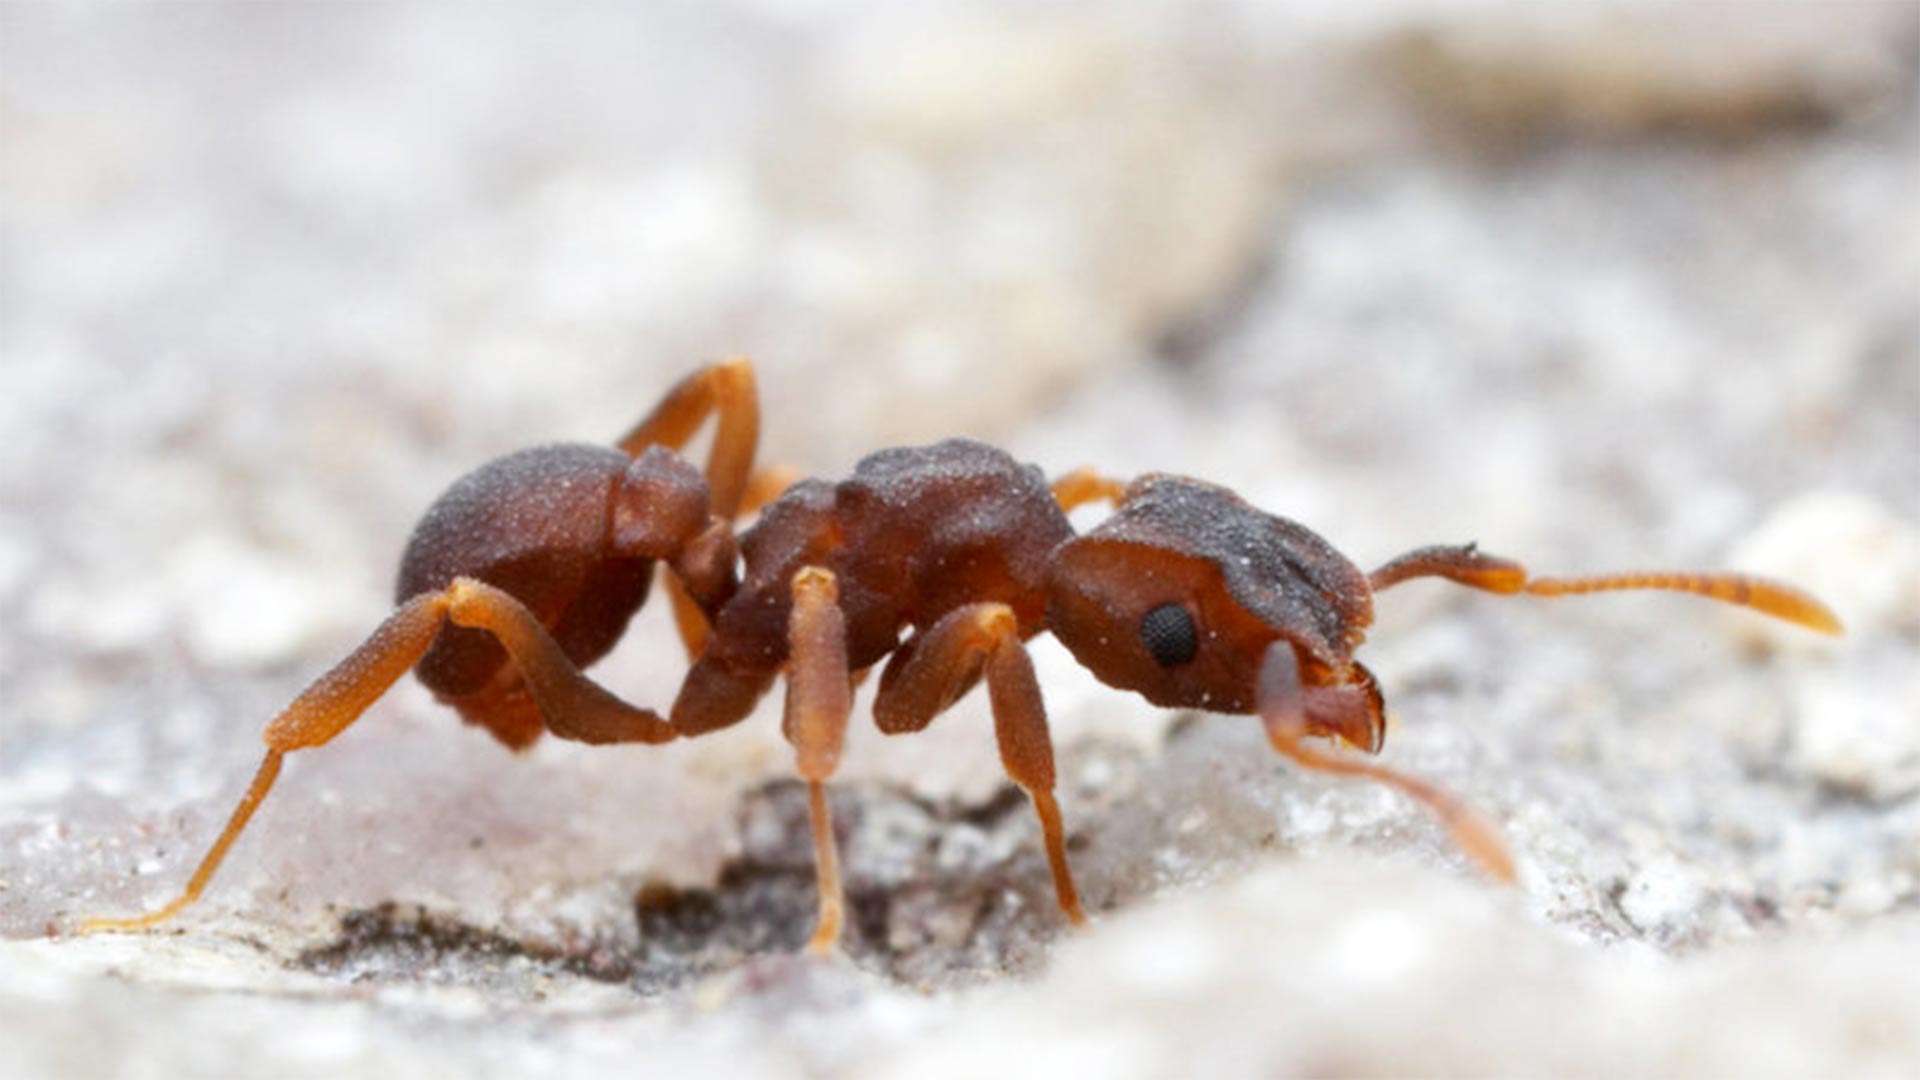 Scientists have isolated a molecule with disease-fighting potential in a microbe living on a type of fungus-farming ant (genus Cyphomyrmex). The microbe kills off other hostile microbes attacking the ants' fungus, a food source.